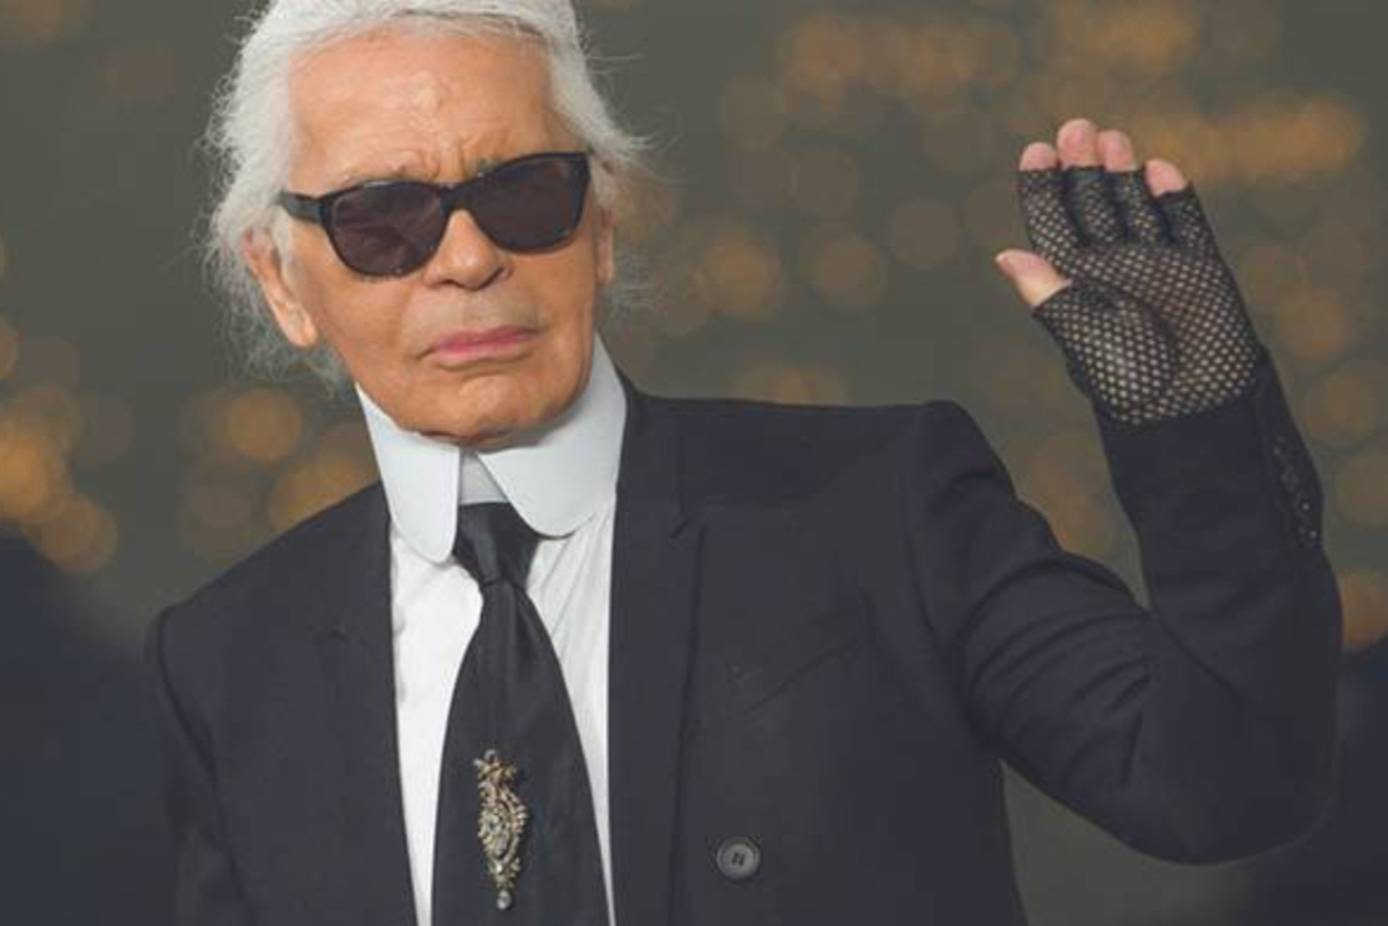 Local Artists Salute New Karl Lagerfeld Product at Gump's Event in San  Francisco - Fashion School Daily